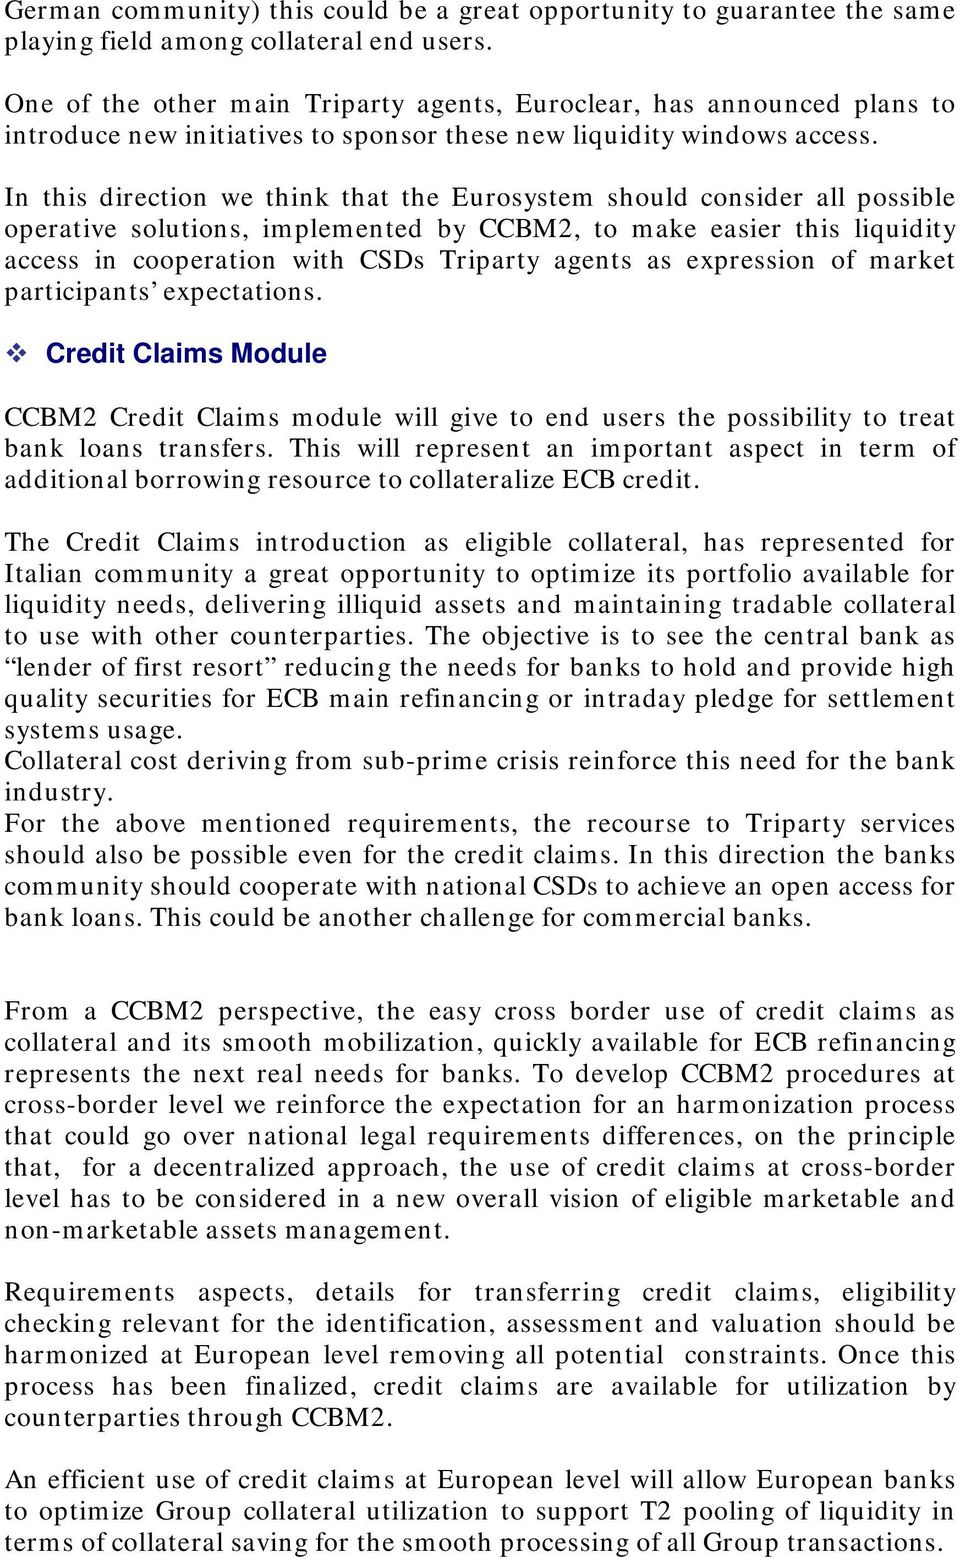 In this direction we think that the Eurosystem should consider all possible operative solutions, implemented by CCBM2, to make easier this liquidity access in cooperation with CSDs Triparty agents as